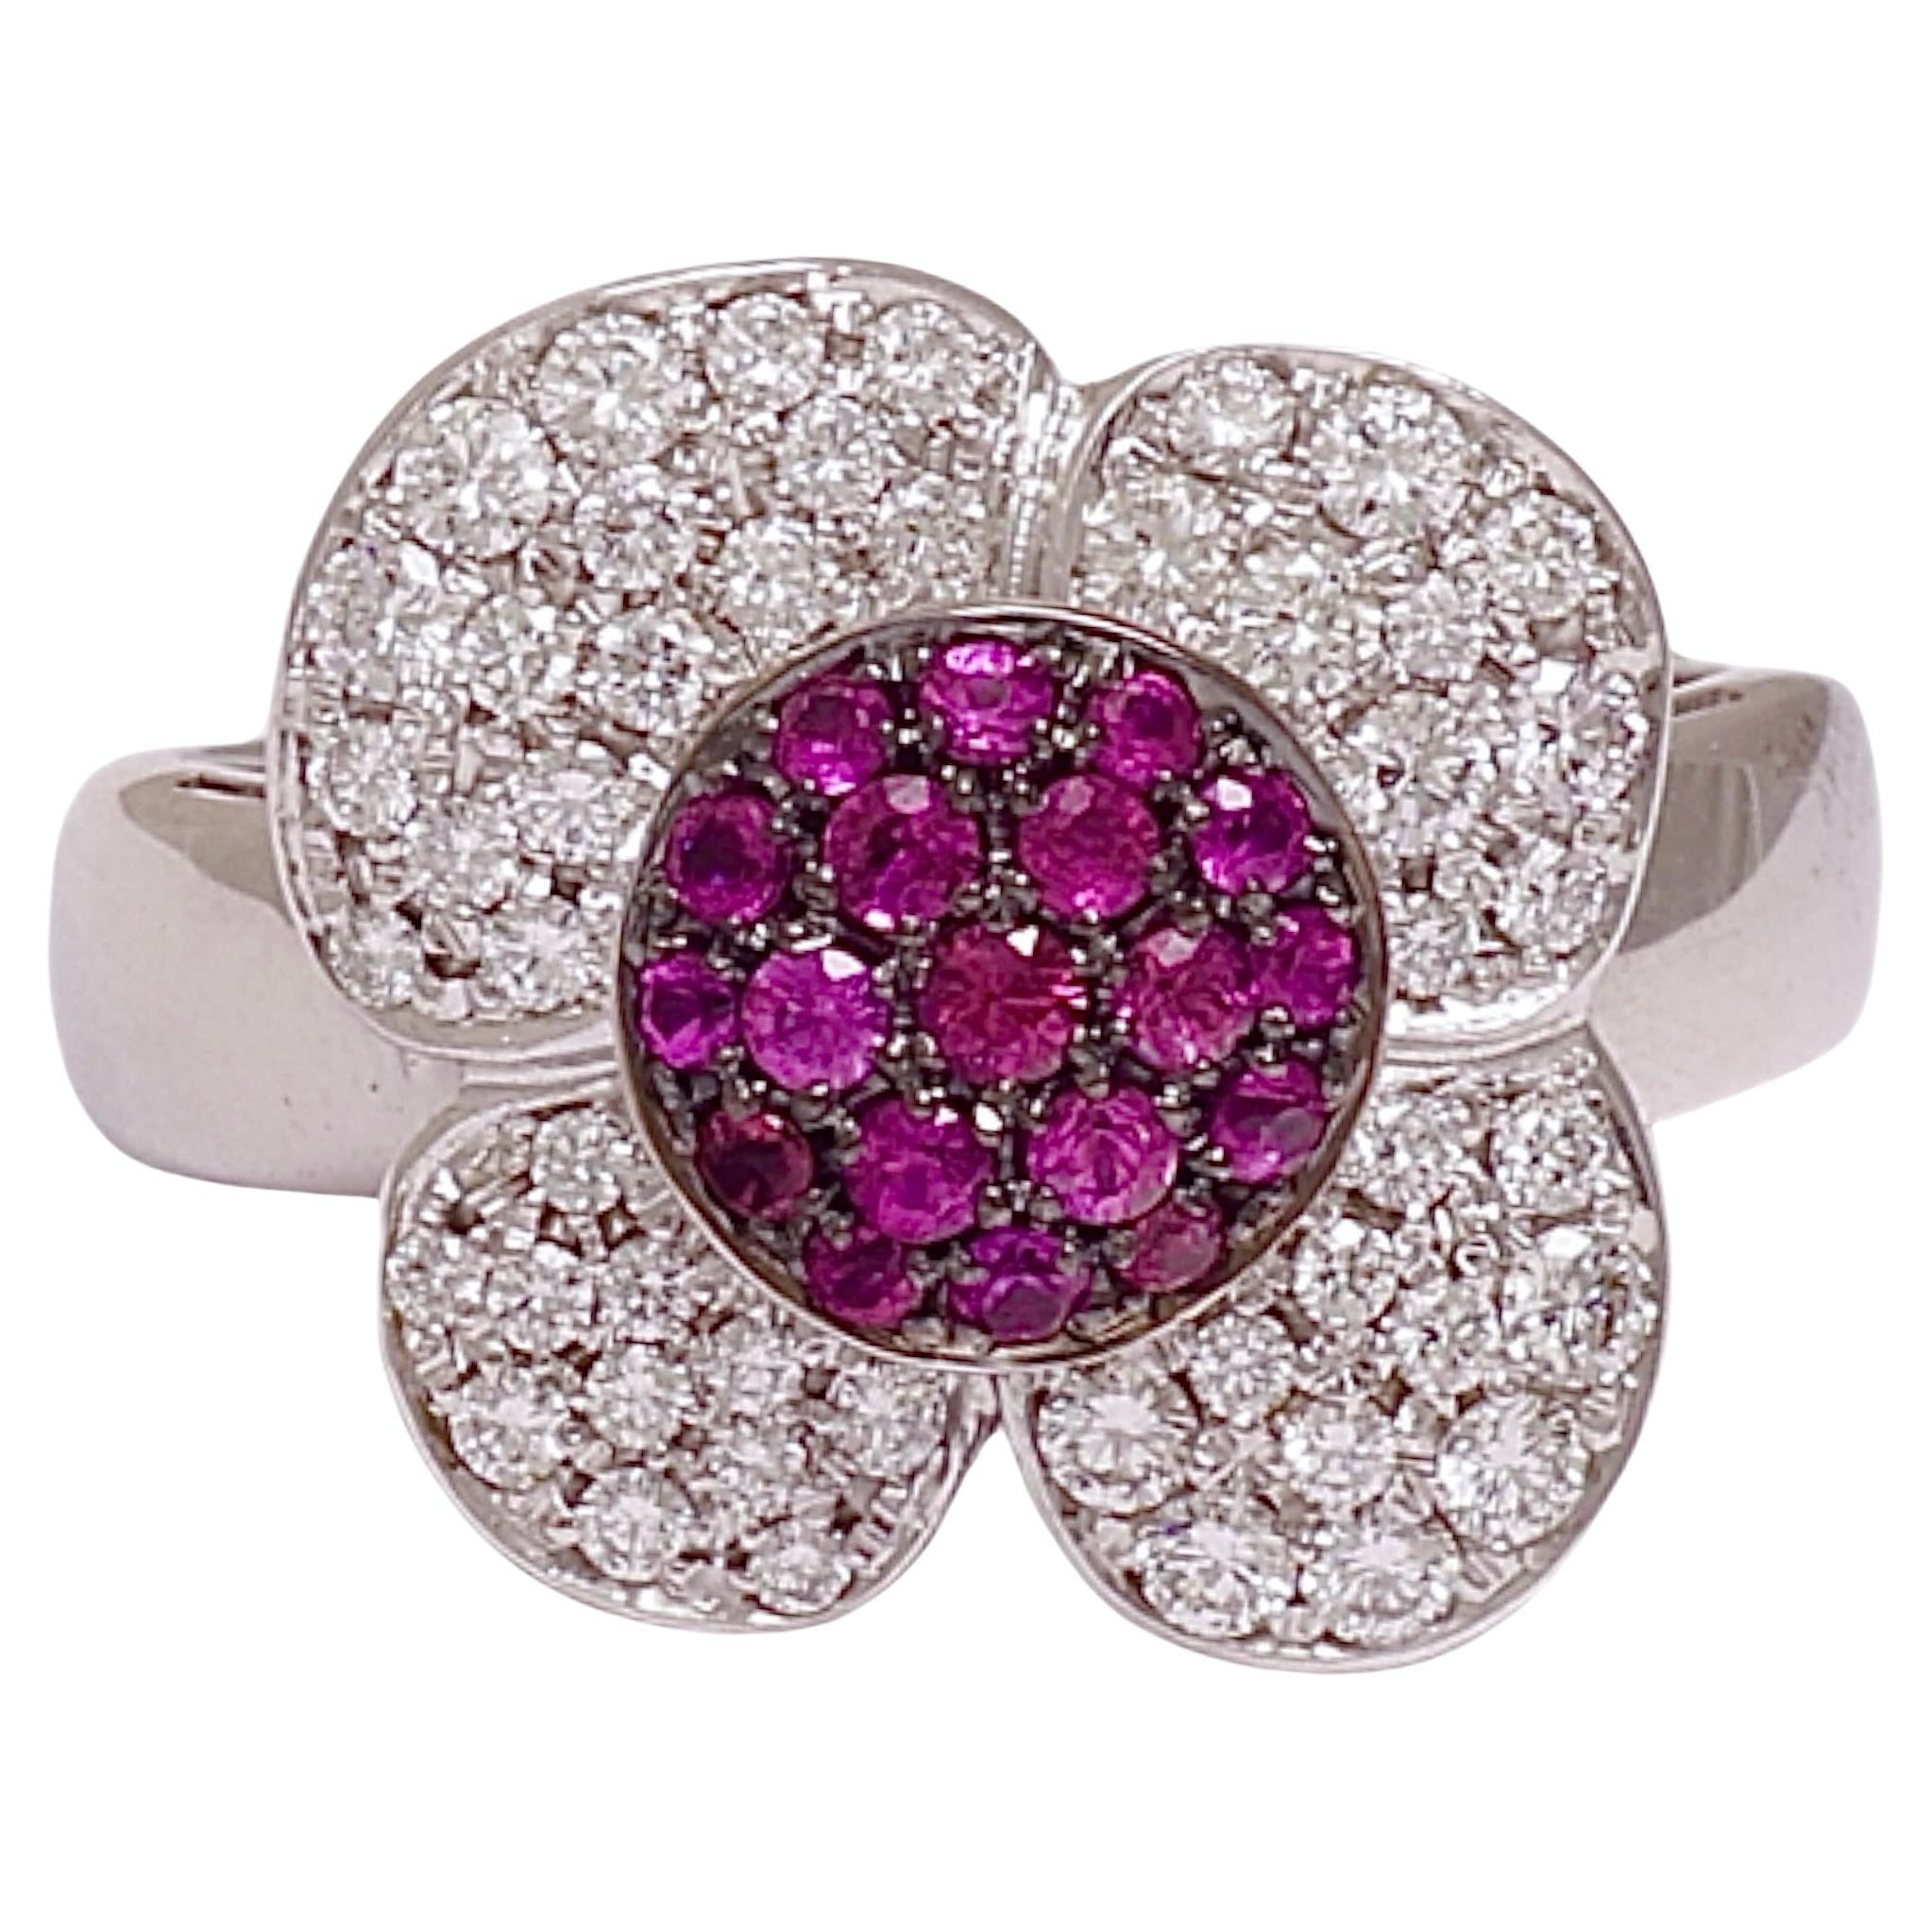  18 kt. White Gold Flower Shape Ring with 1 ct. Diamonds & 0.5 ct. Pink Sapphire For Sale